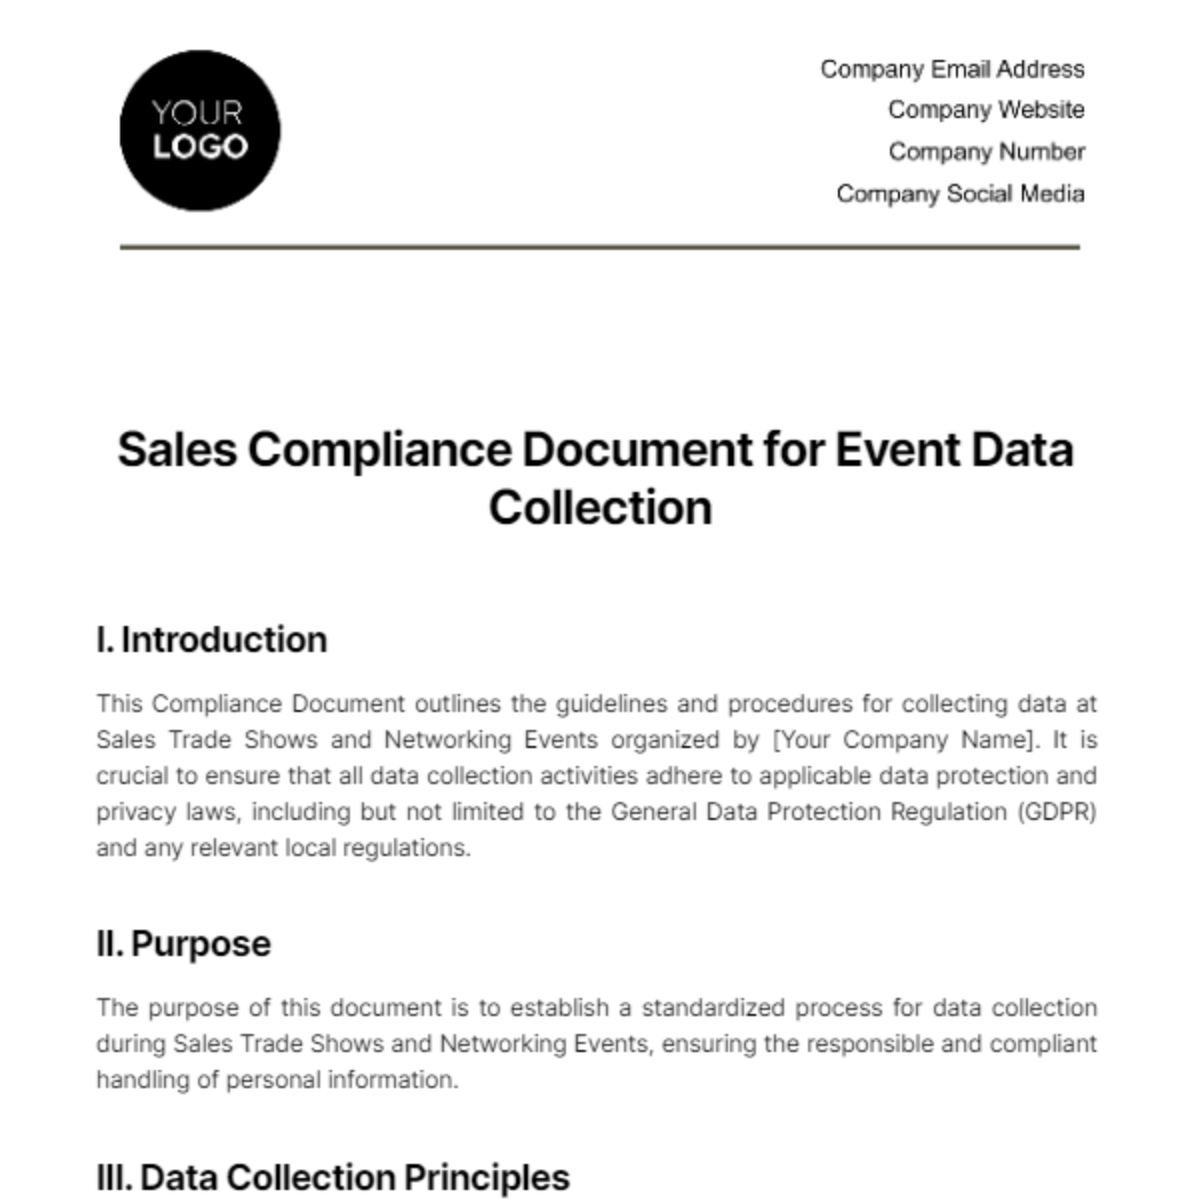 Sales Compliance Document for Event Data Collection Template